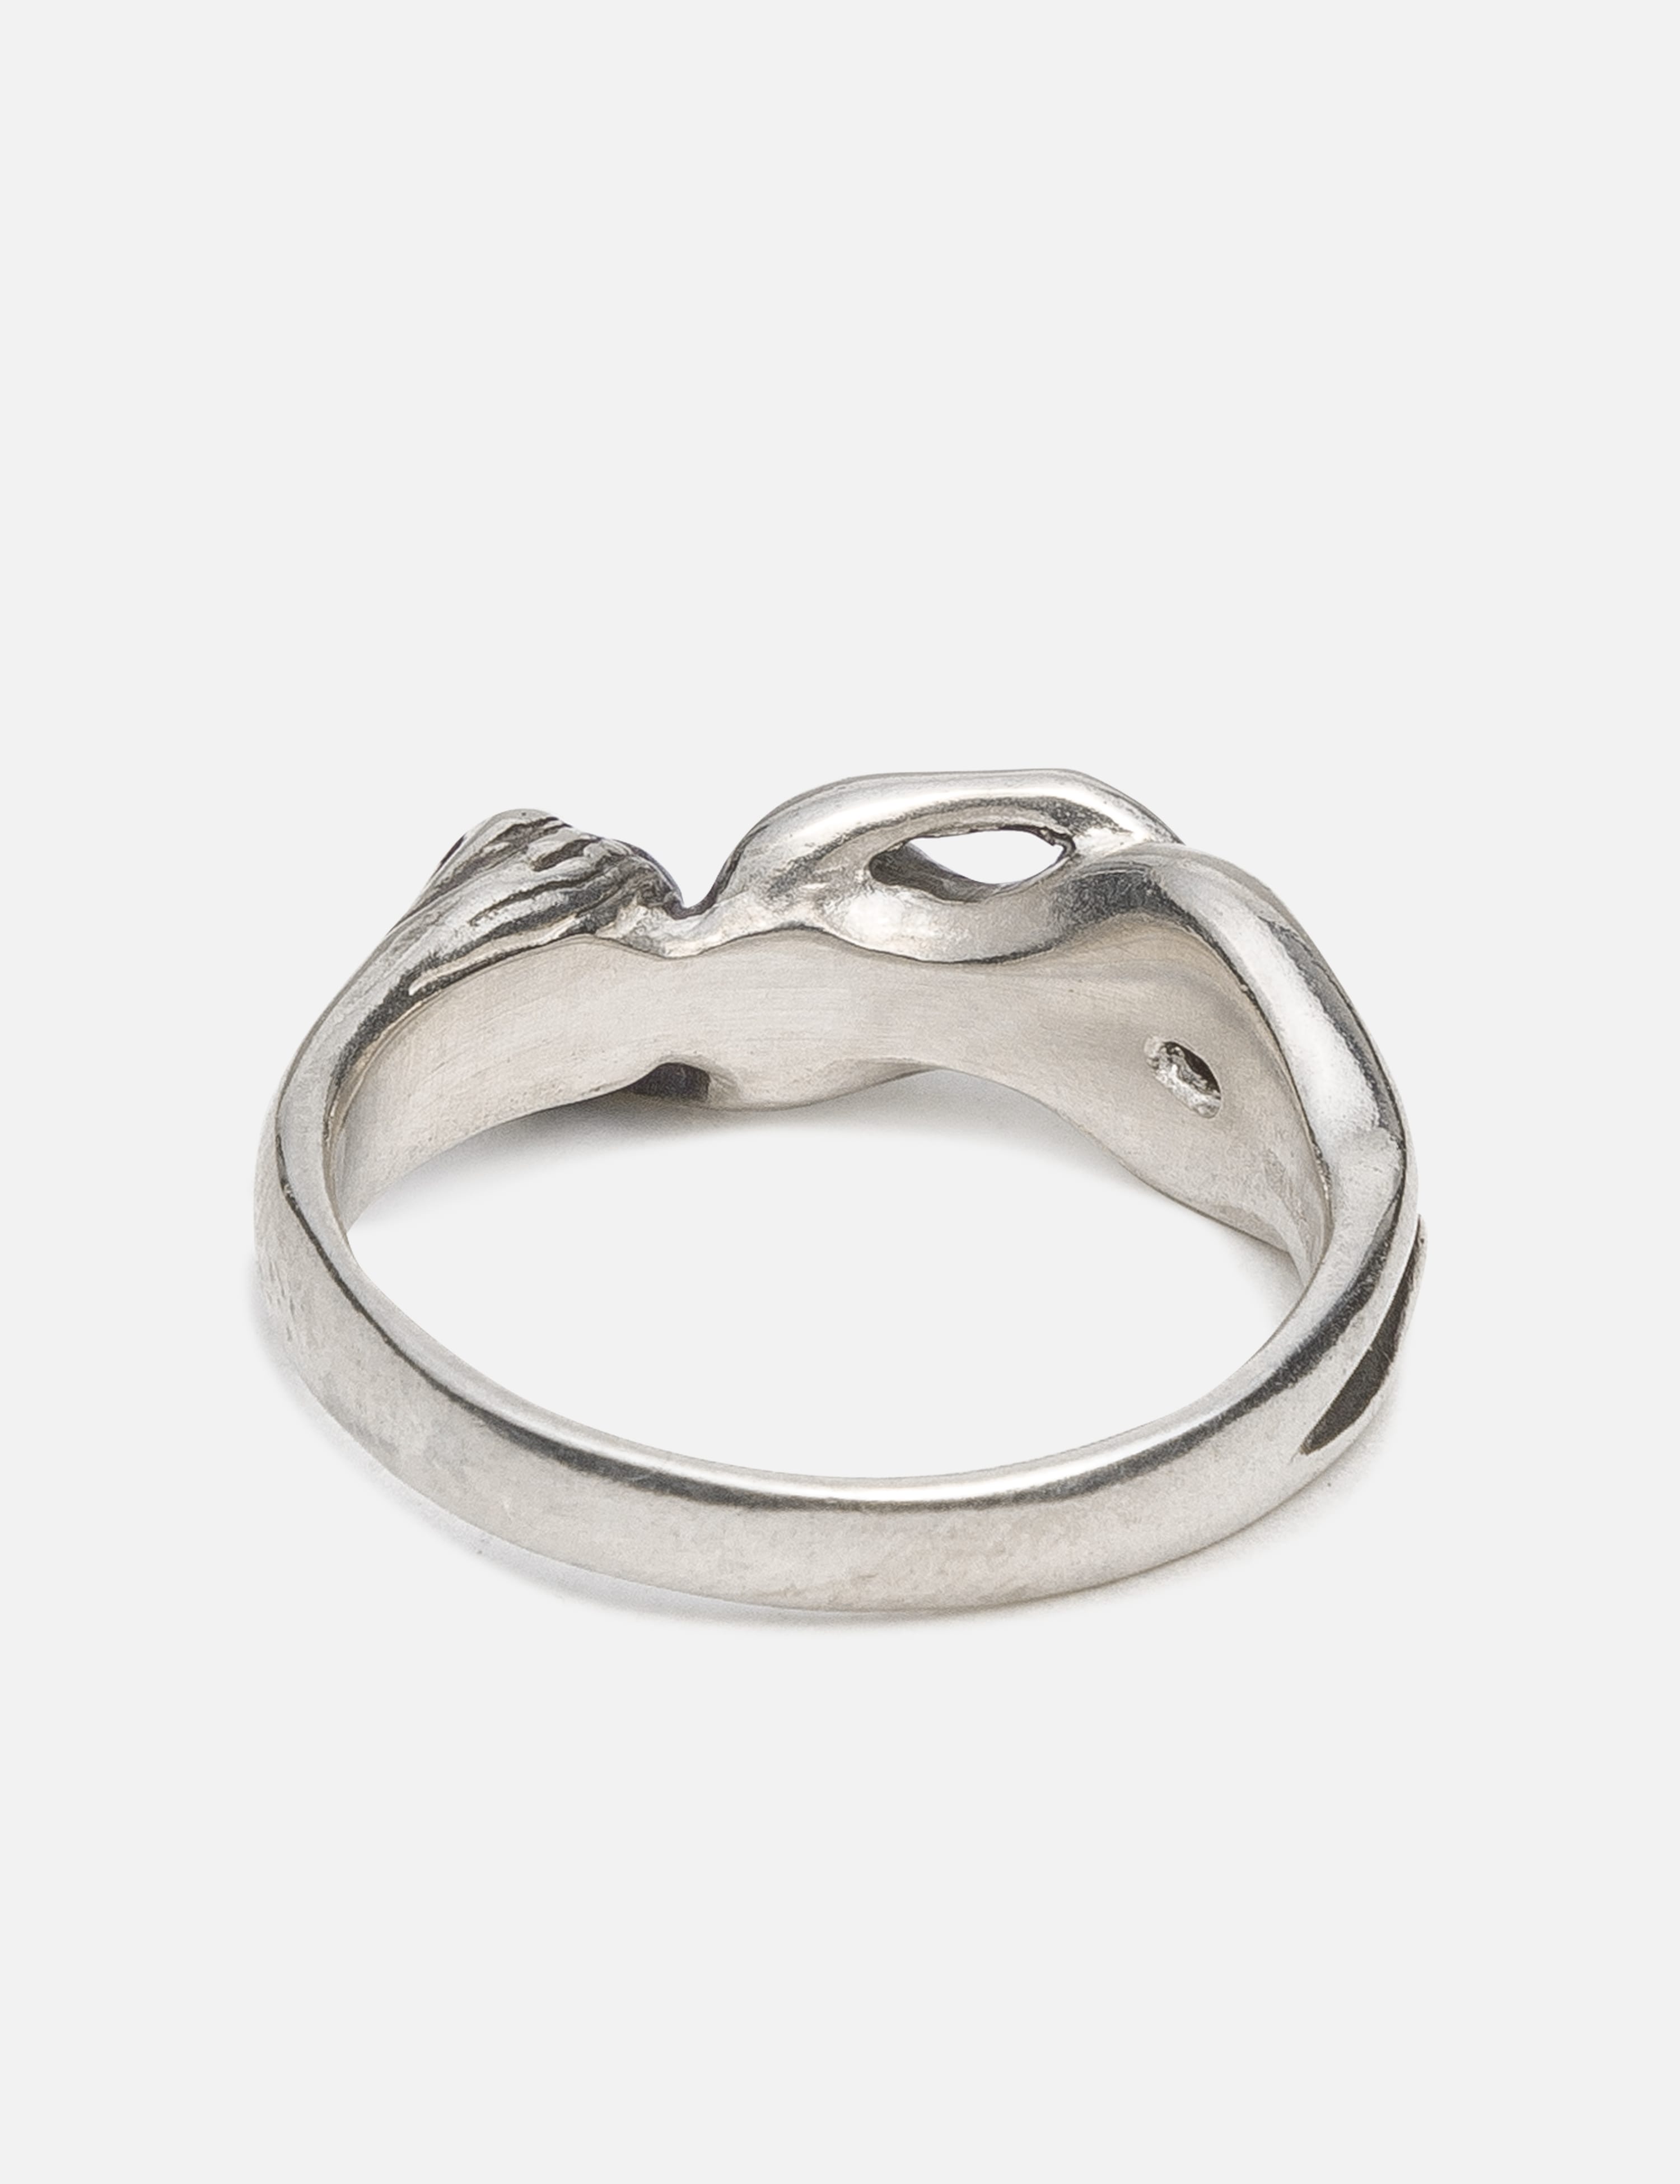 Wacko Maria - Nude Ring | HBX - Globally Curated Fashion and